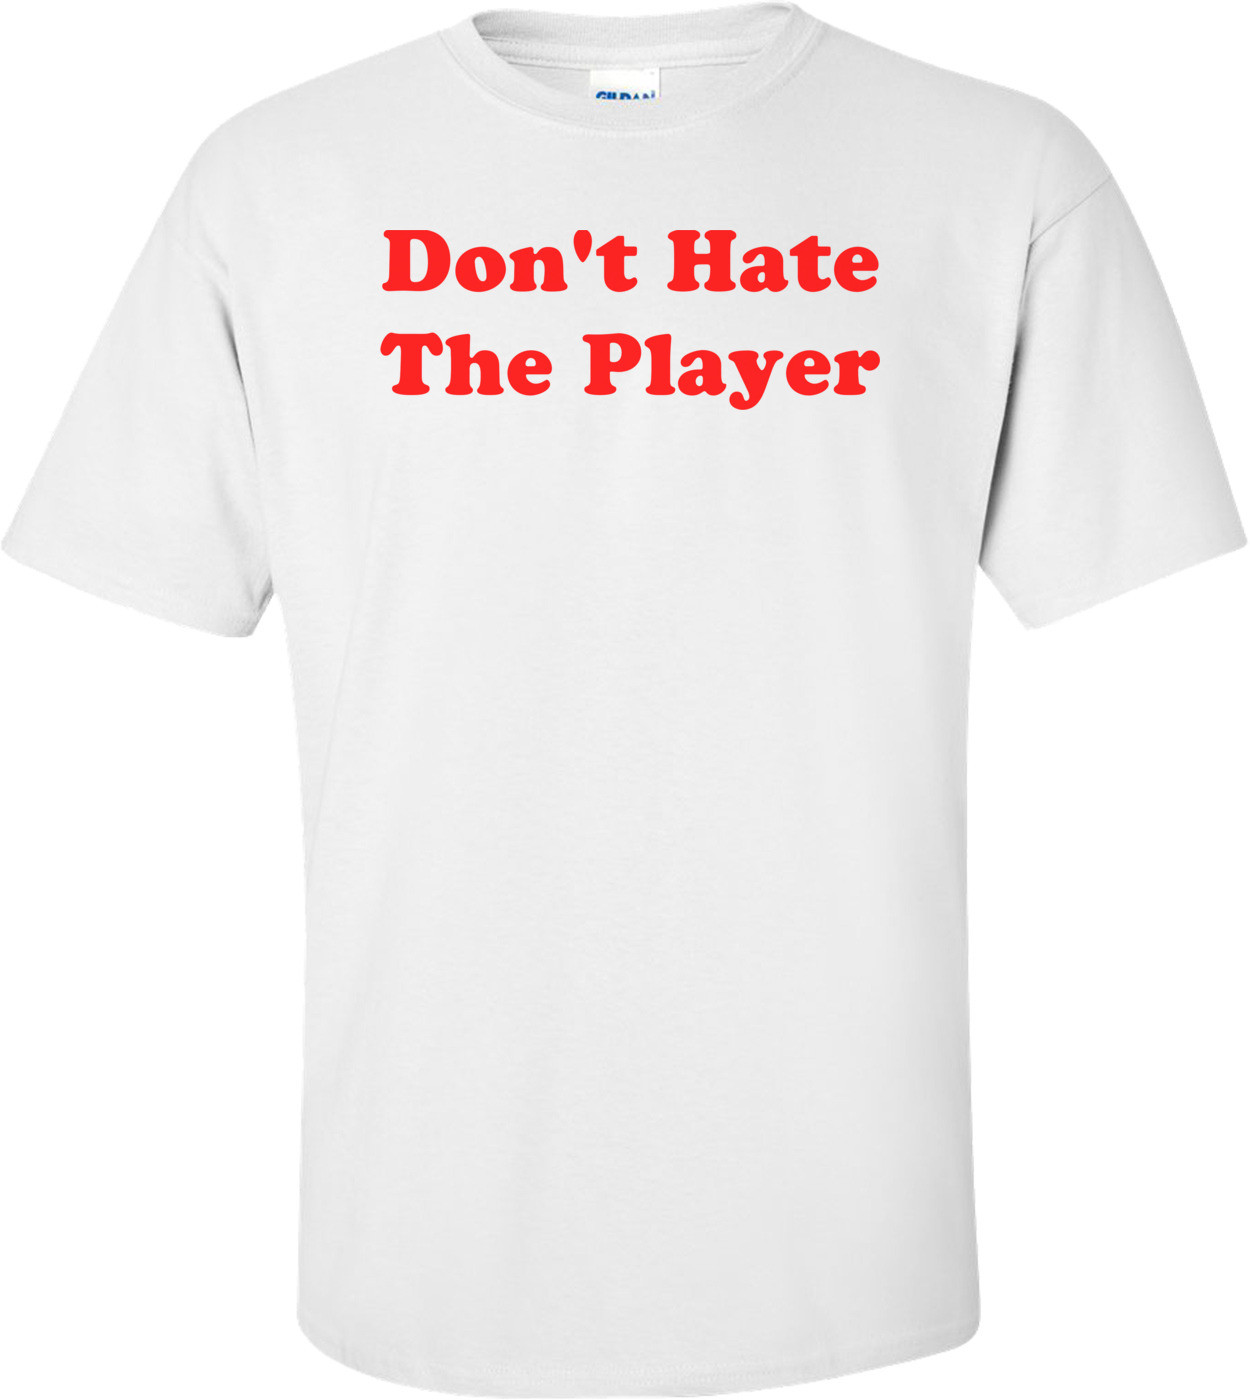 Don't Hate The Player